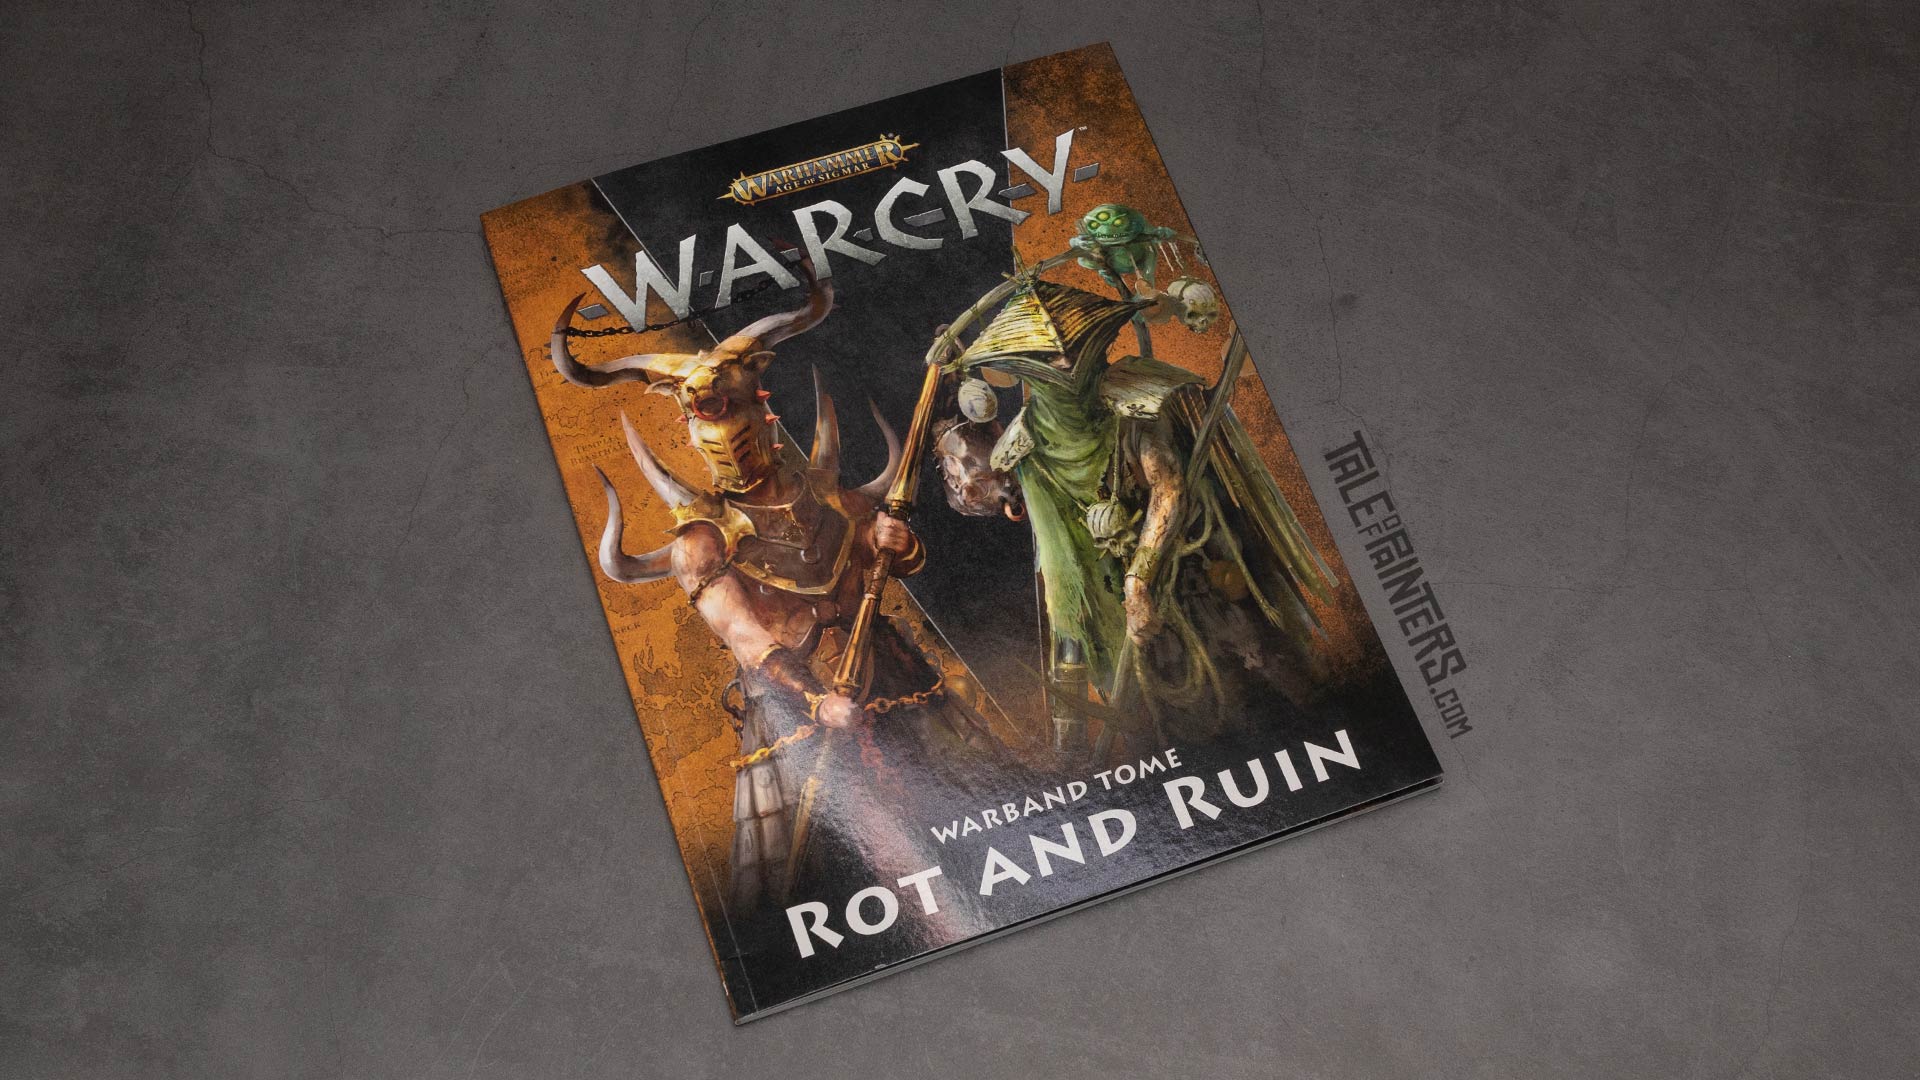 Warcry Heart of Ghur Warband Tome Rot and Ruin cover